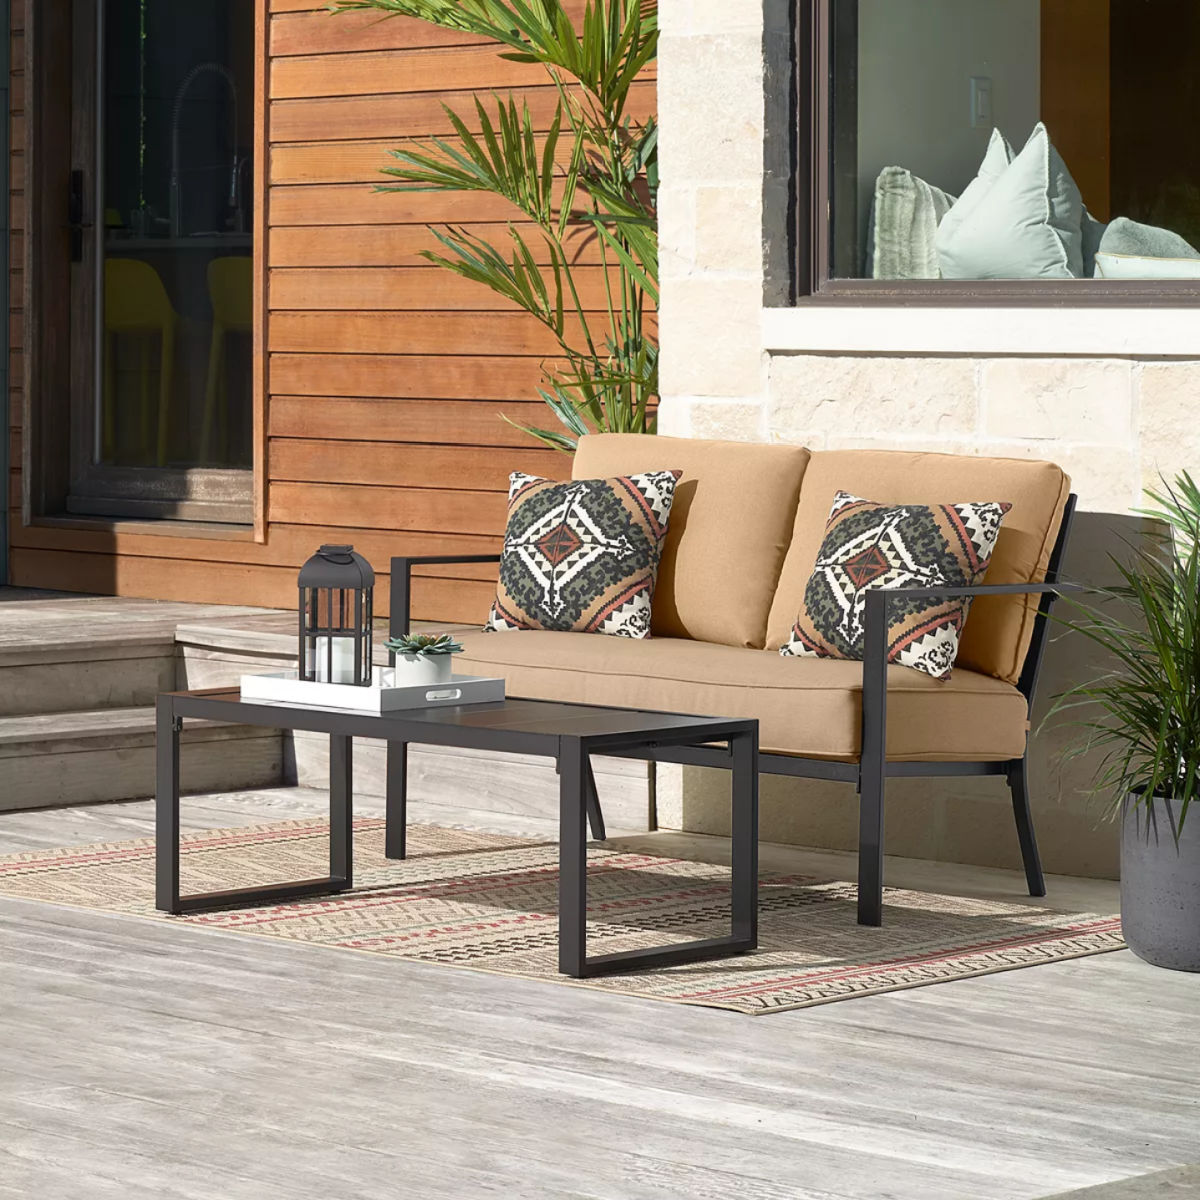 Sonoma Goods For Life® Kenwood 2-Piece Patio Loveseat & Coffee Table Set